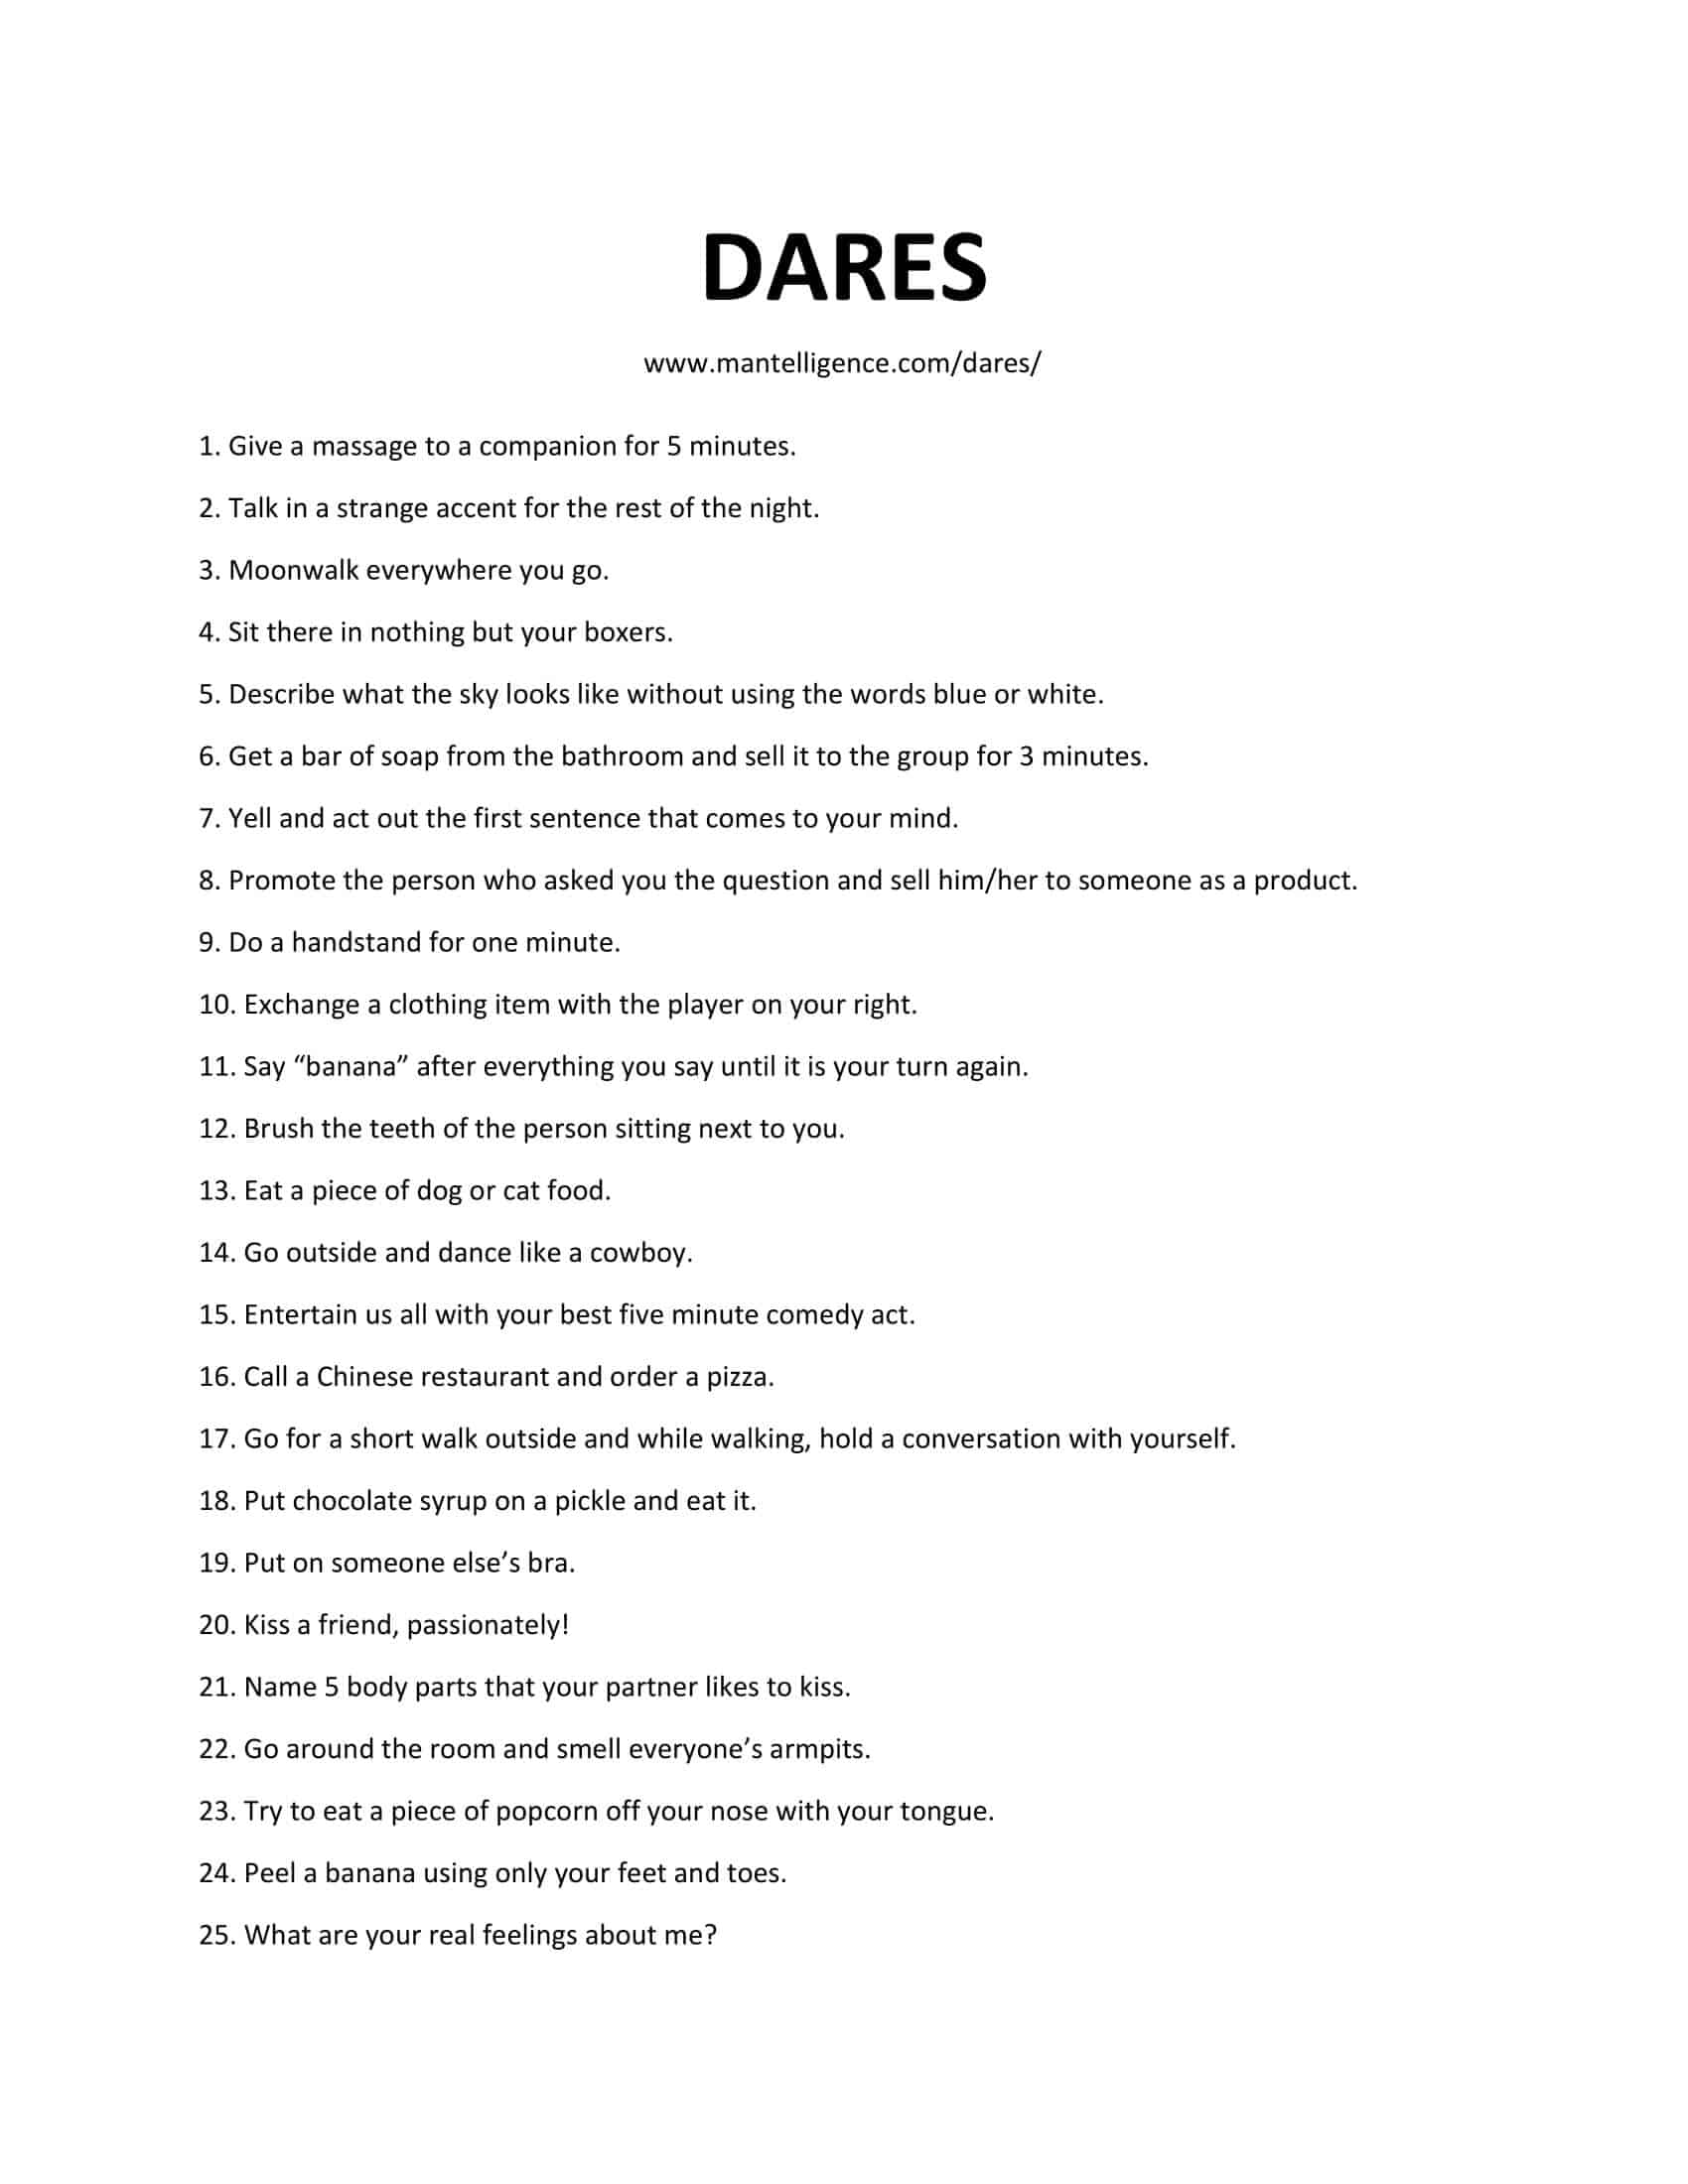 truth or dare questions for adults clean